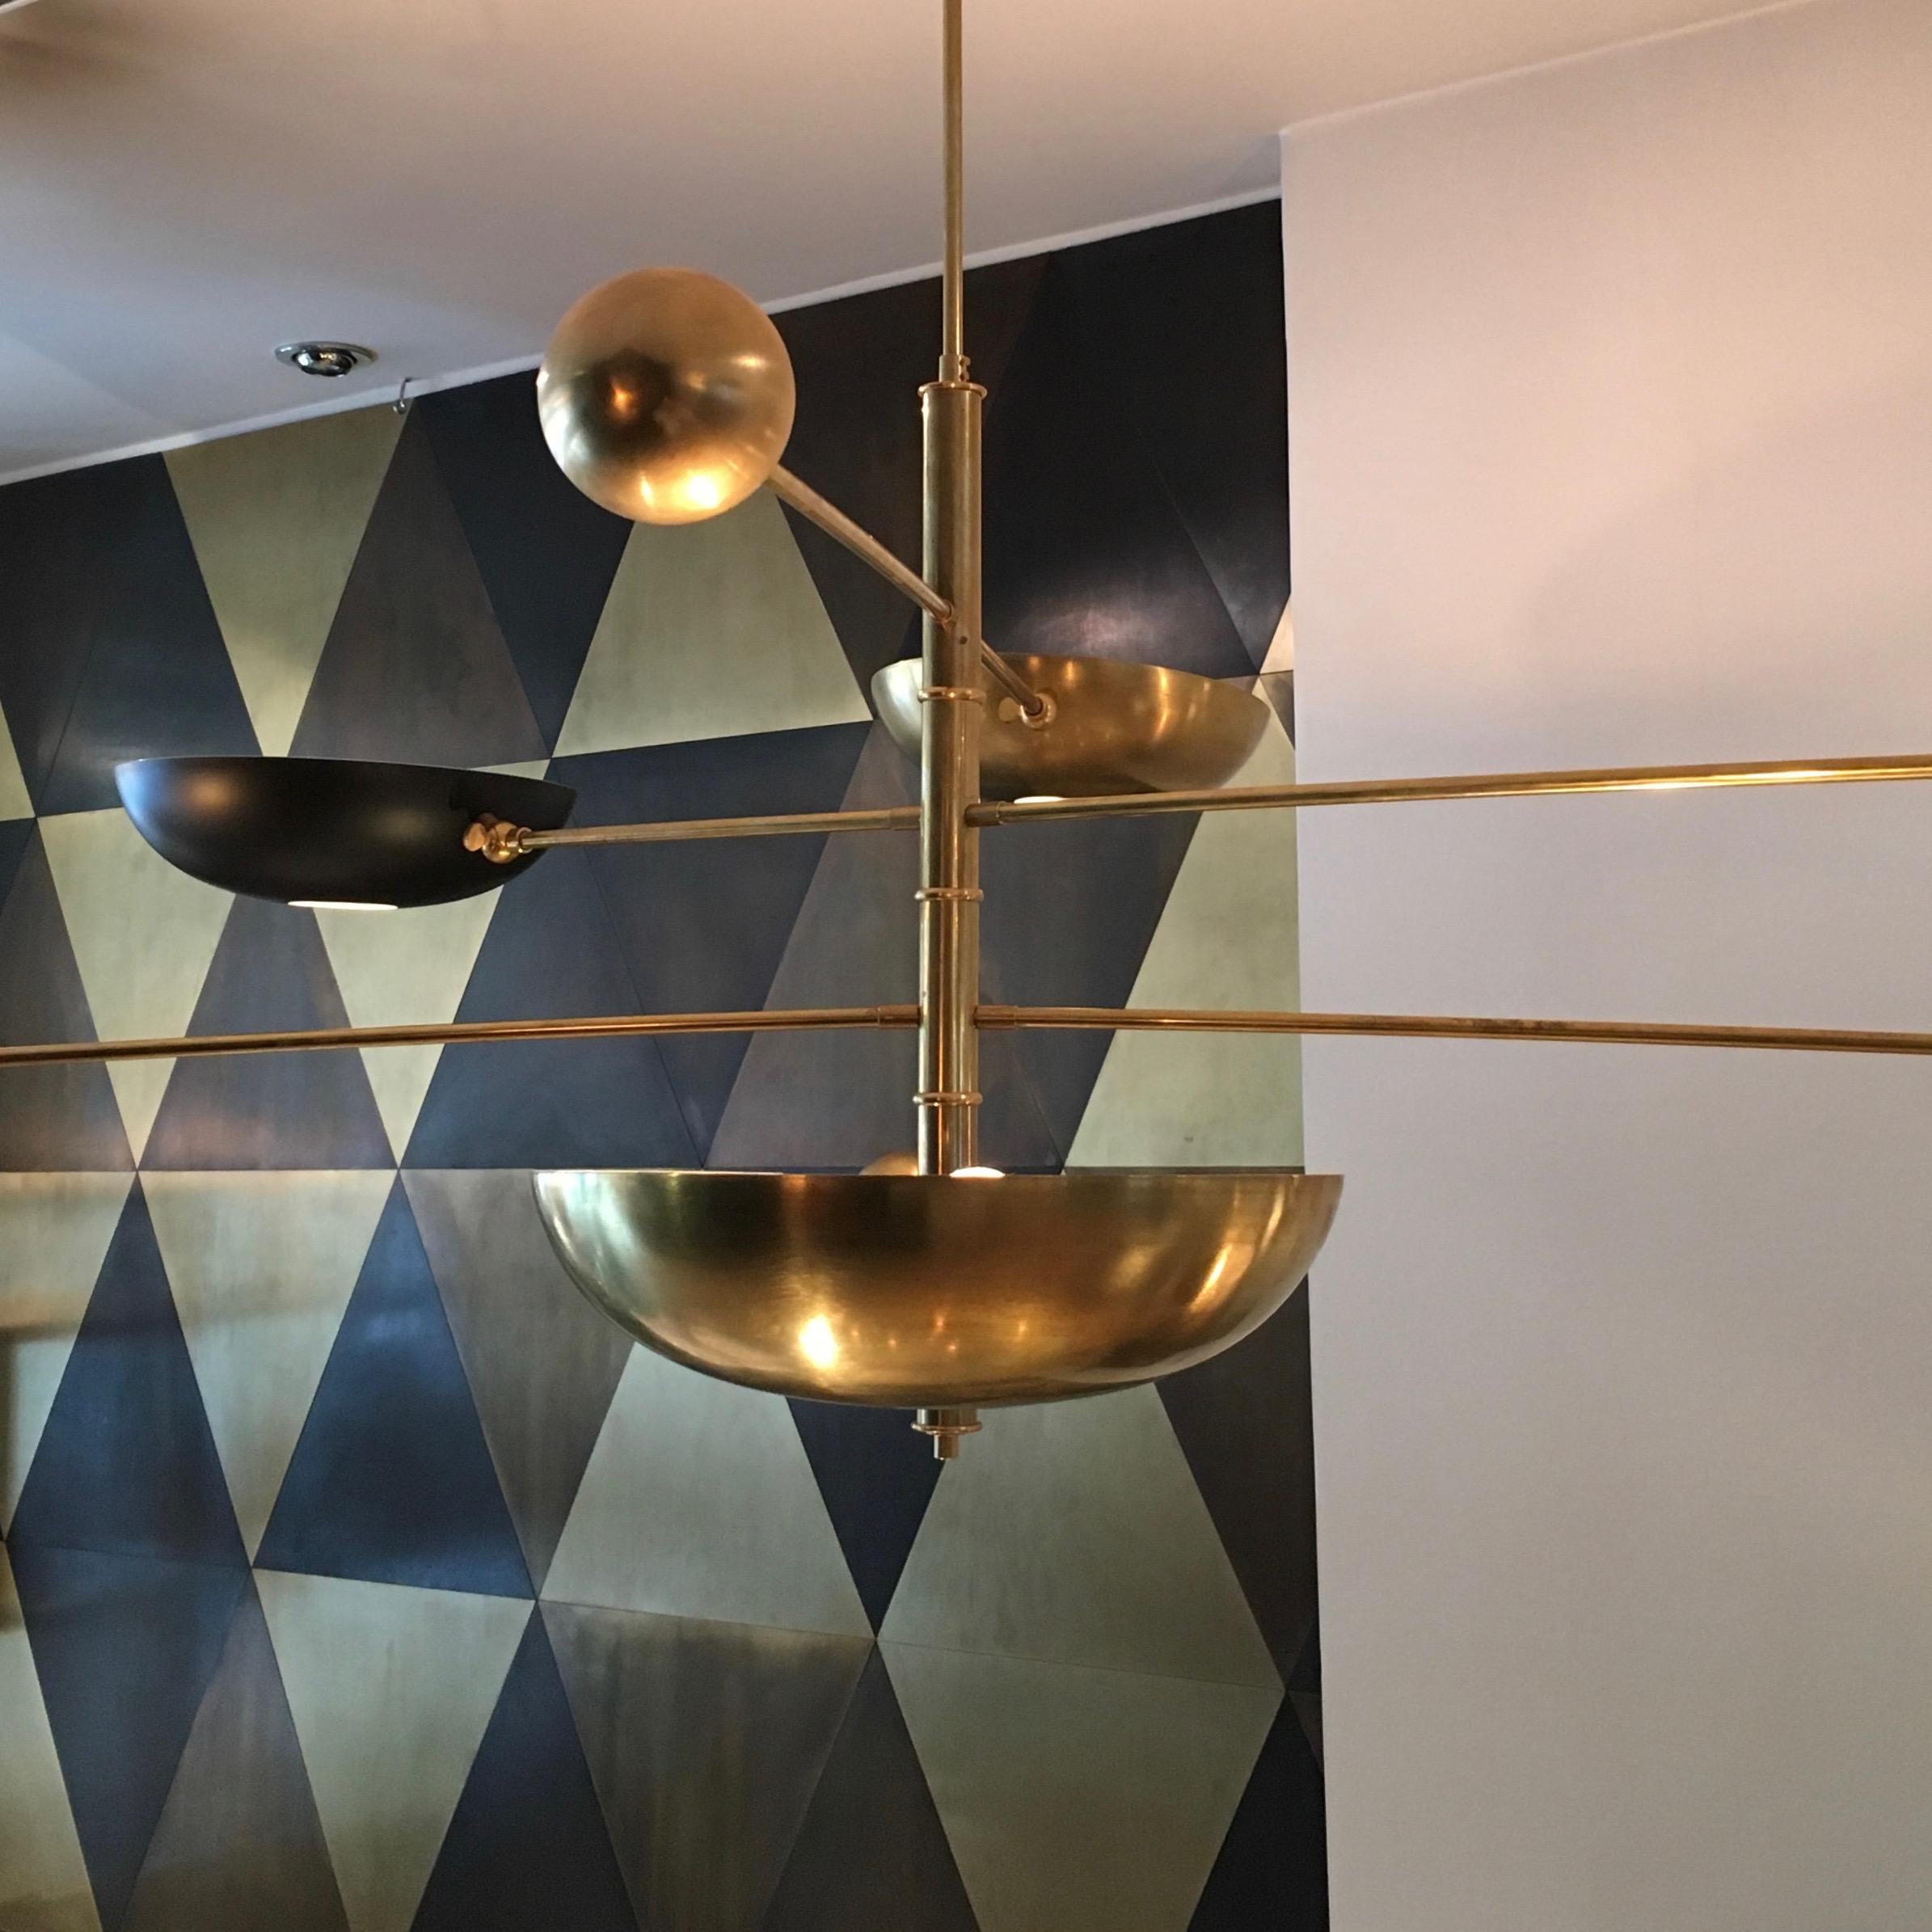 Four-tier midcentury style pendant, inspired by Stilnovo. 

Recreated in Italy by artisans using the same materials and techniques as the original manufacturers, each cup is counter-balanced by a hollow ball, weighted with metal beads which can be